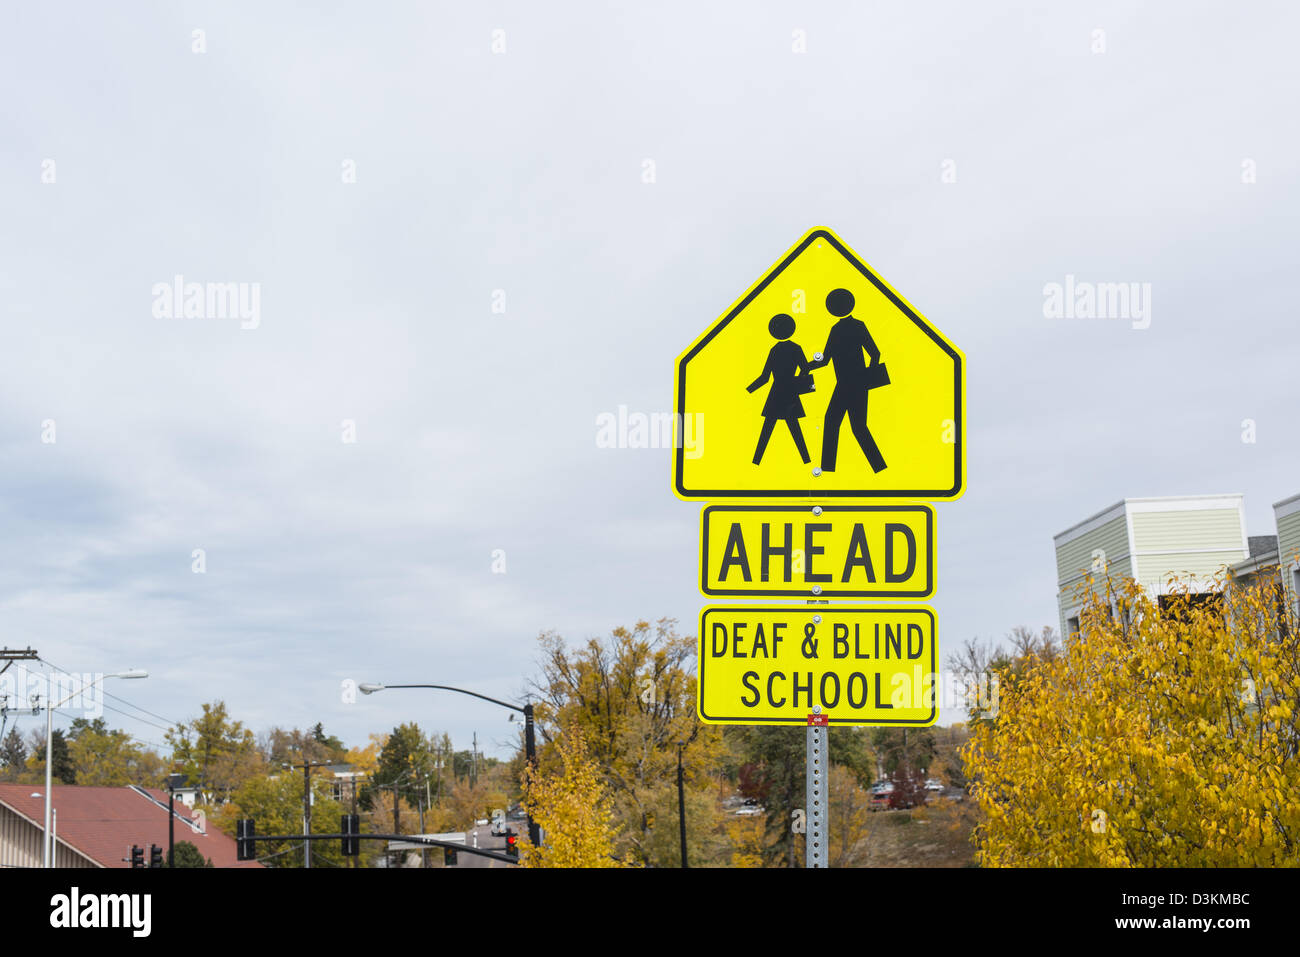 Traffic sign warning for a deaf and blind school ahead Stock Photo